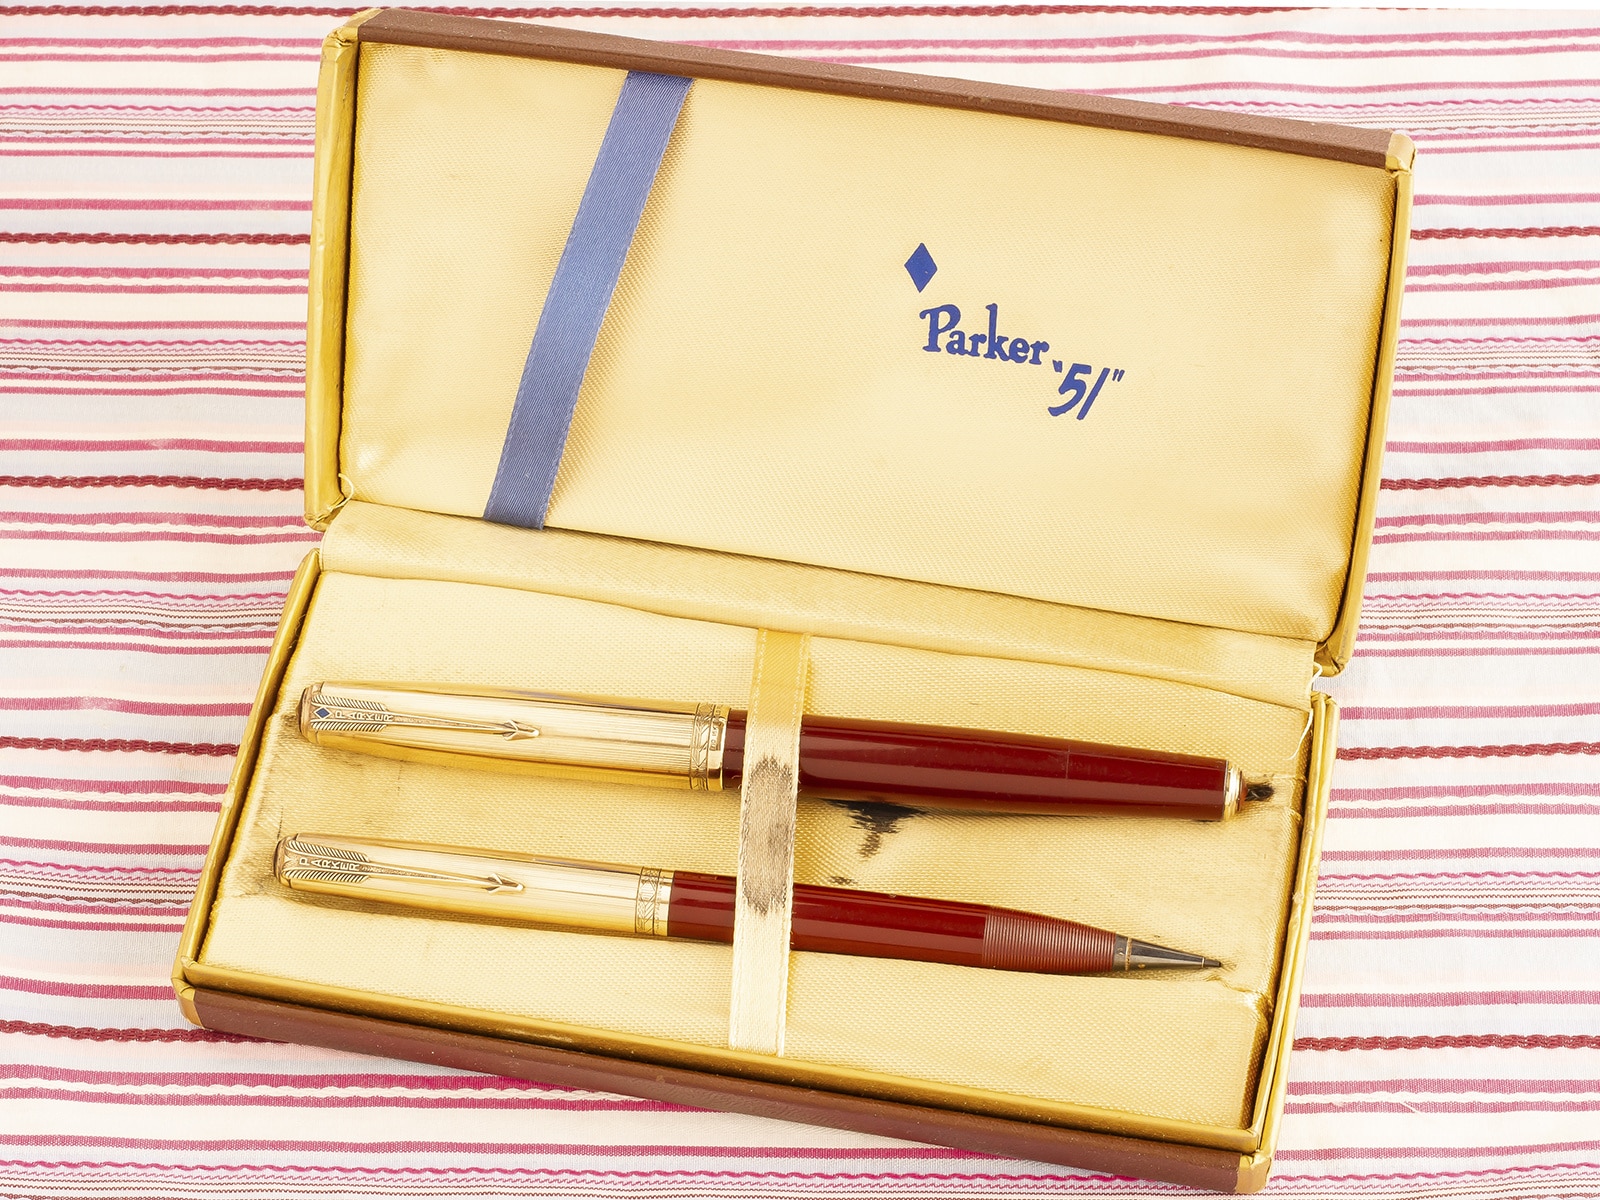 parker 51 deluxe double jewel 16k gold filled cap red maroon fonntain pen pencil box set